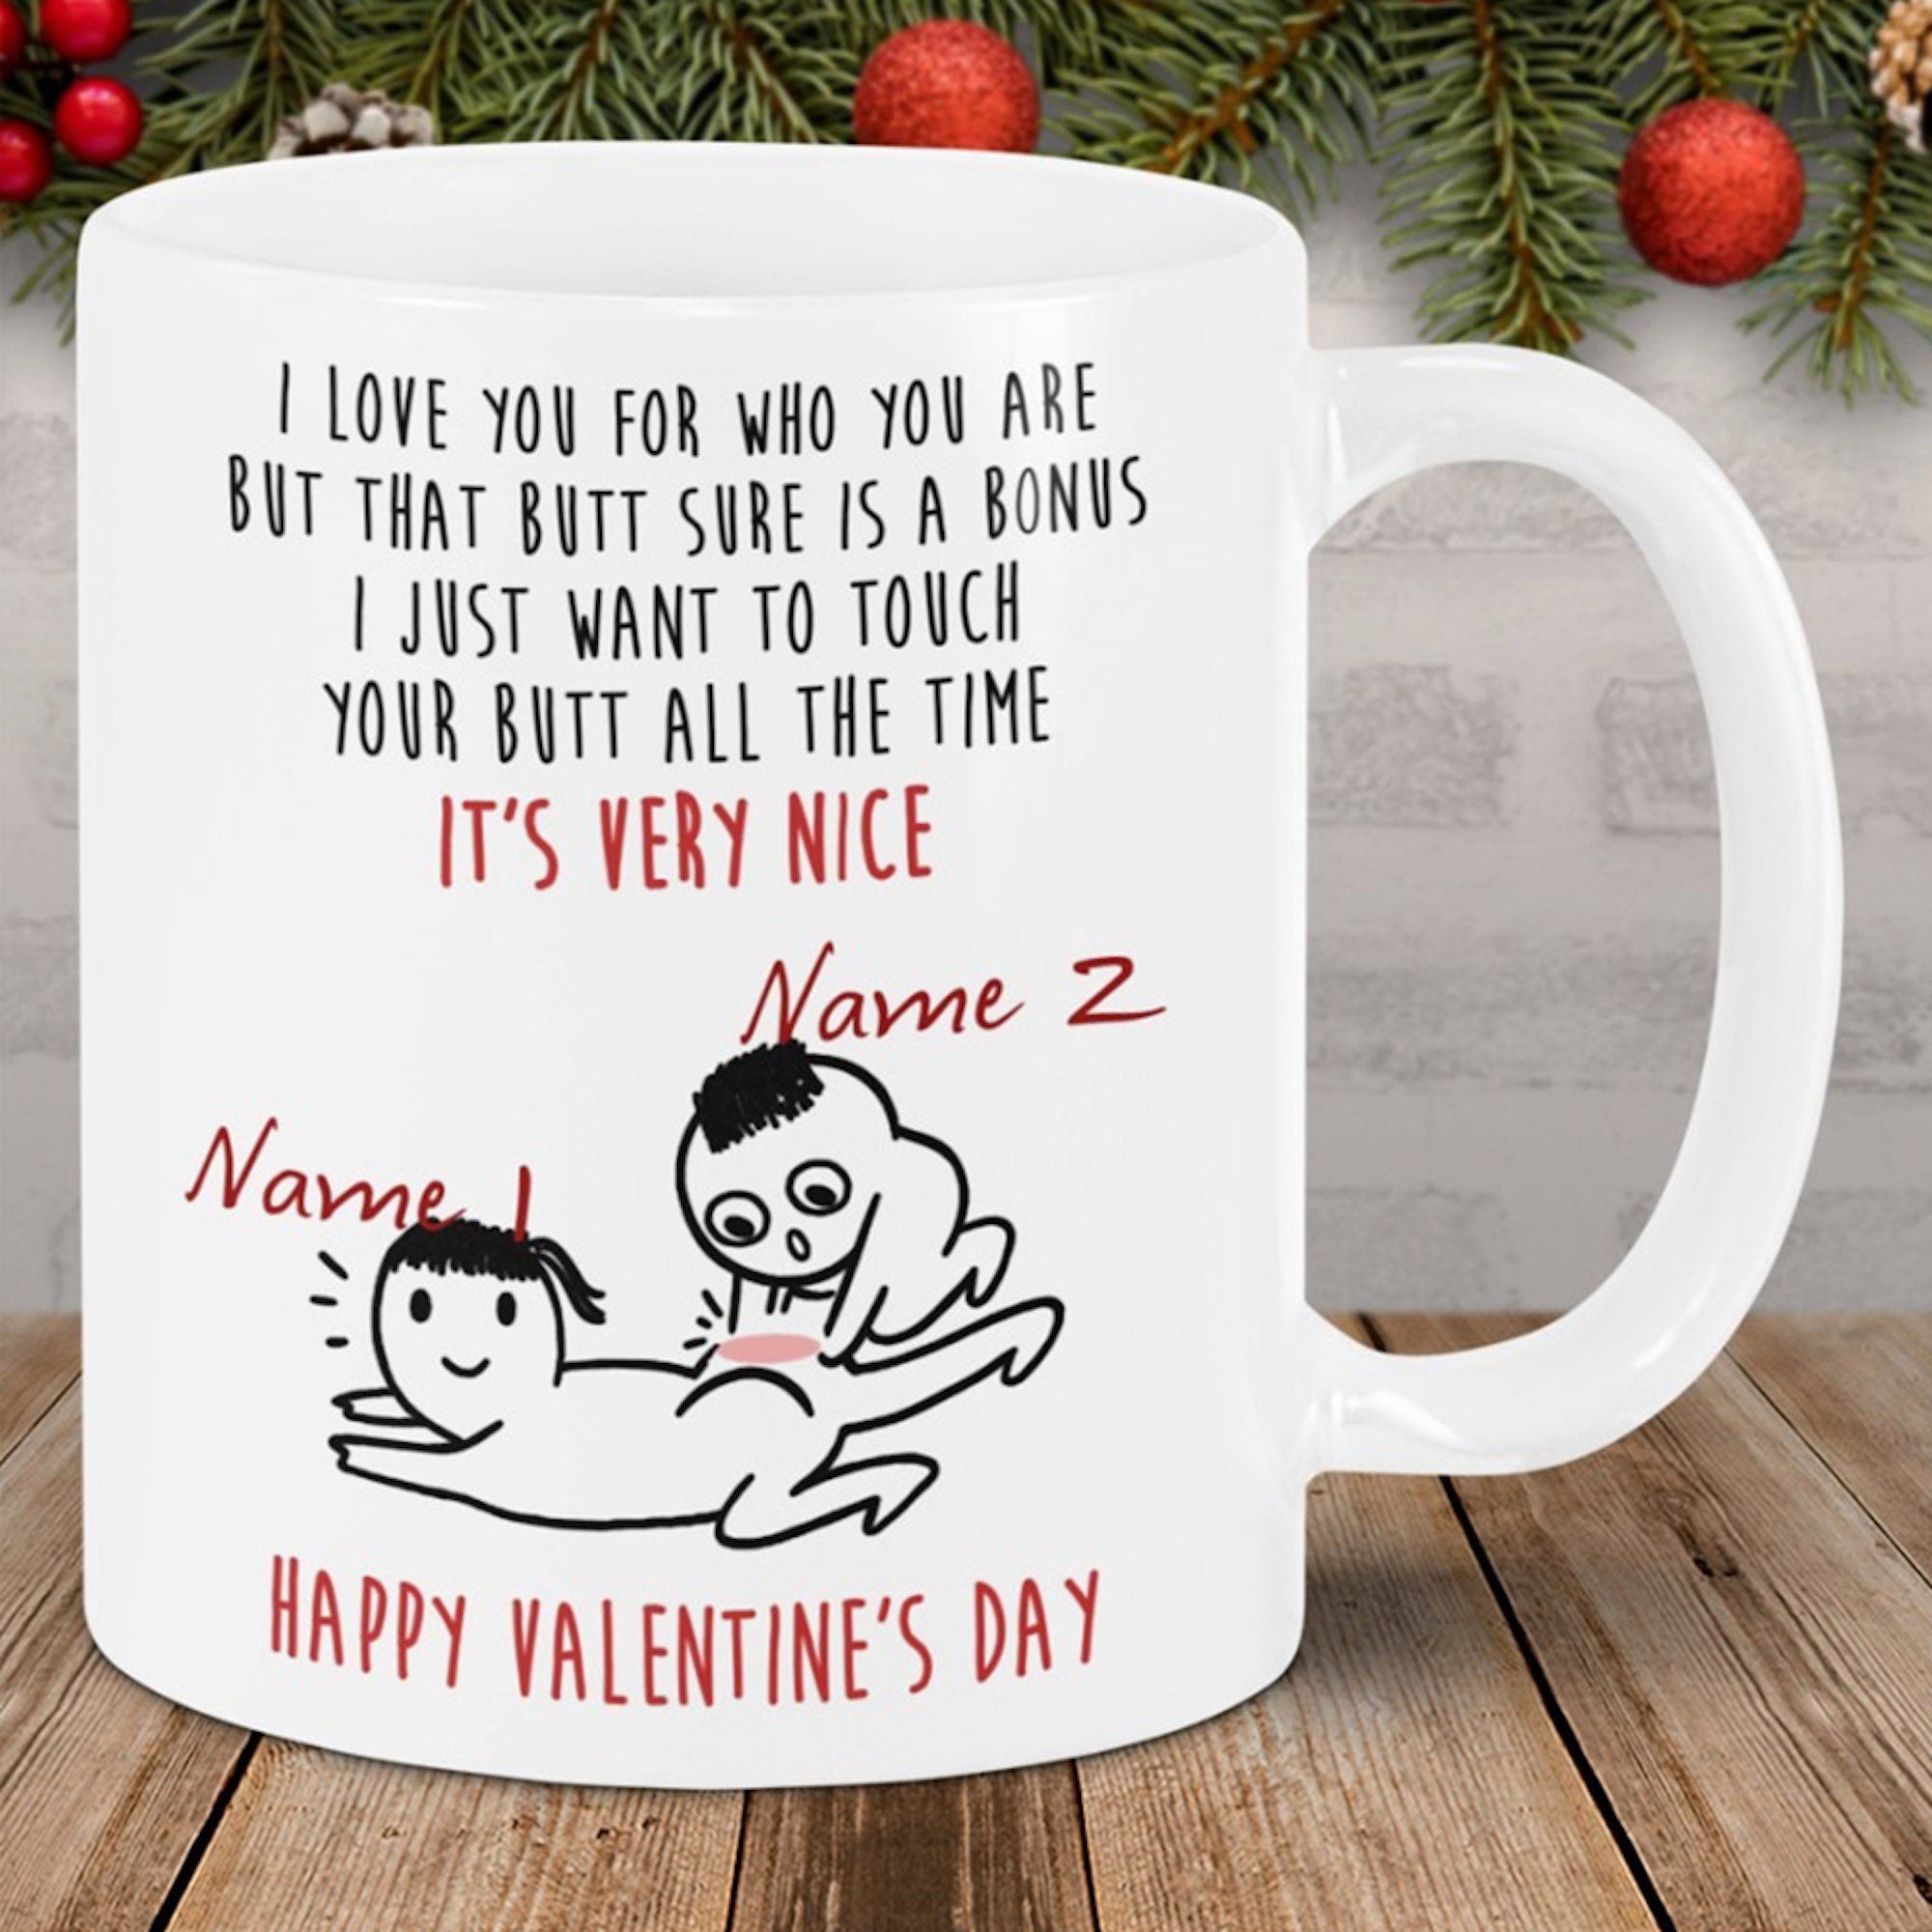 Personalized Name Mug I Just Want To Touch Your Butt All The Time Mug Funny Couple Mug For Girlfriend On Birthday Valentines Day Gifts For Her Women From Boyfriend White 11Oz 15Oz